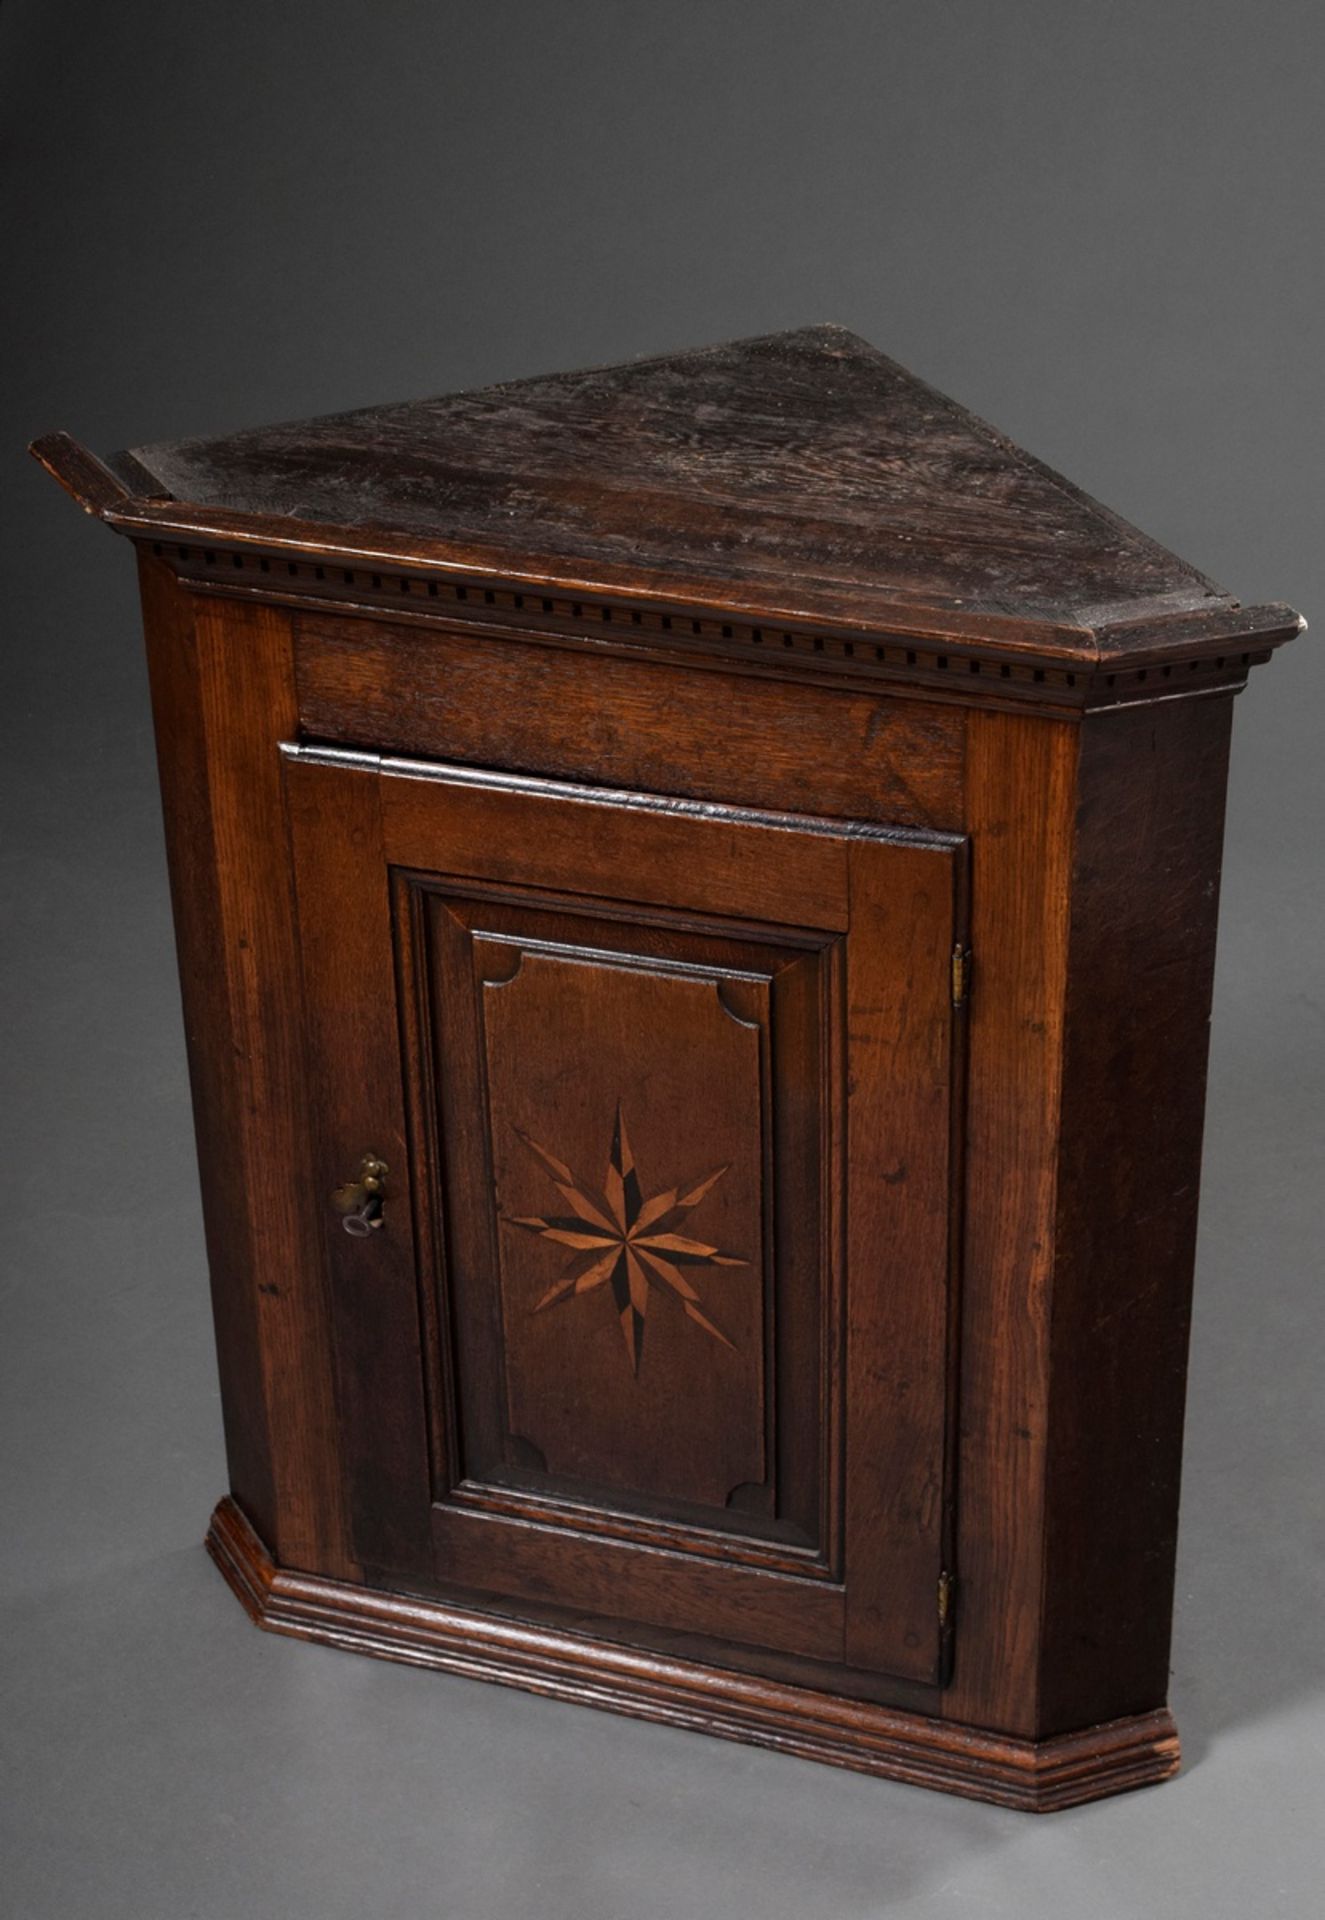 English oak corner wall cupboard, around 1800, dark stained with "star" inlay in the door, 76x61cm, - Image 2 of 4